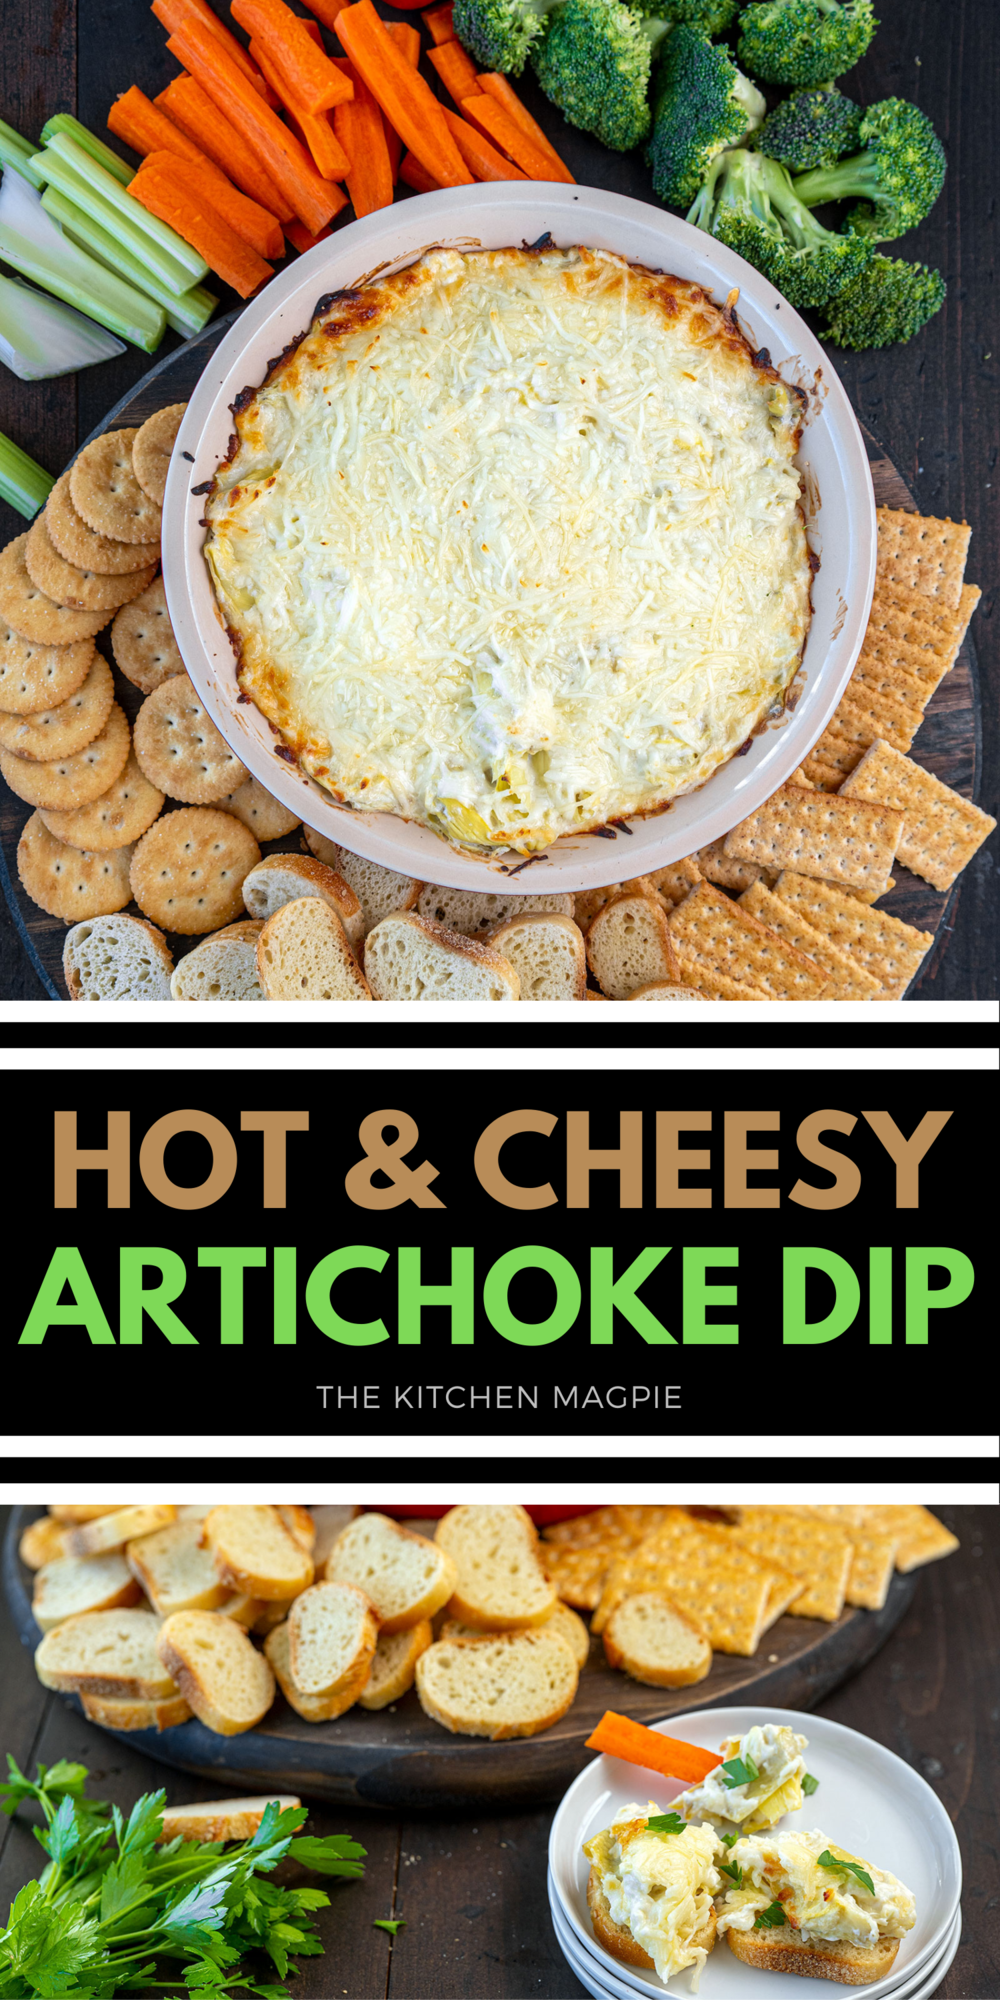 This hot, cheesy artichoke dip is the perfect easy-to-make hot appetizer and a definite crowd pleaser!